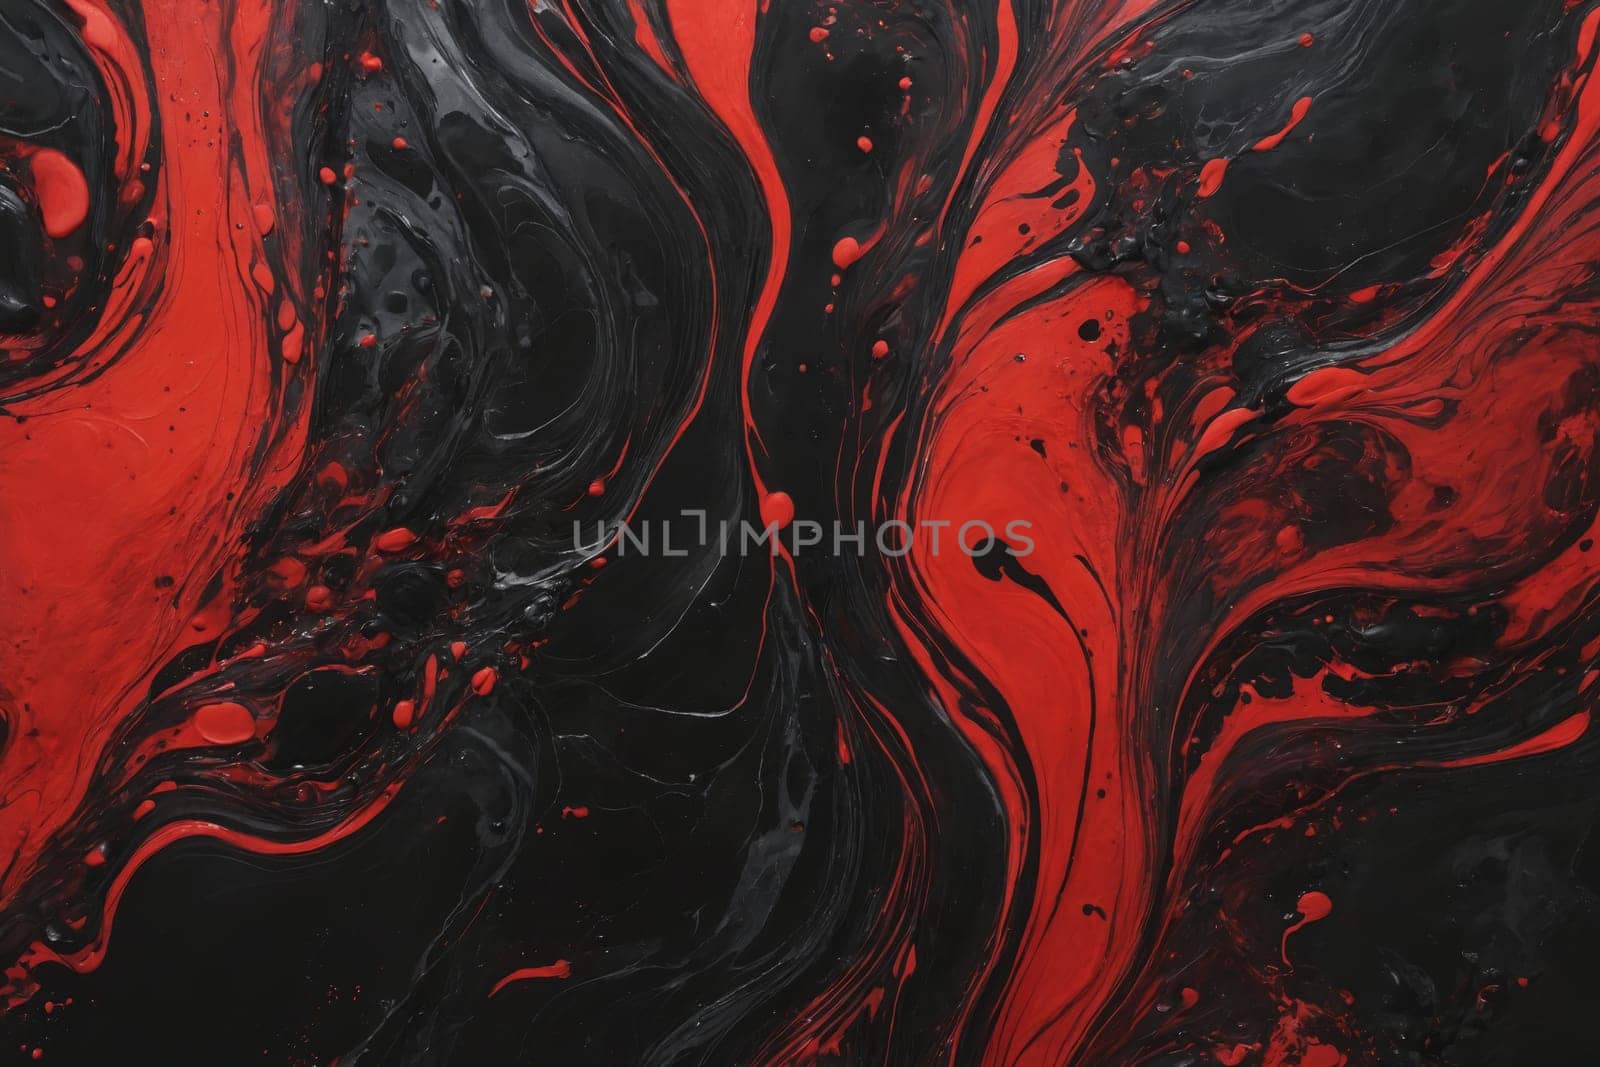 This painting's fluid texture and dynamic red-black contrast evoke a sense of passion and complexity in abstract form.